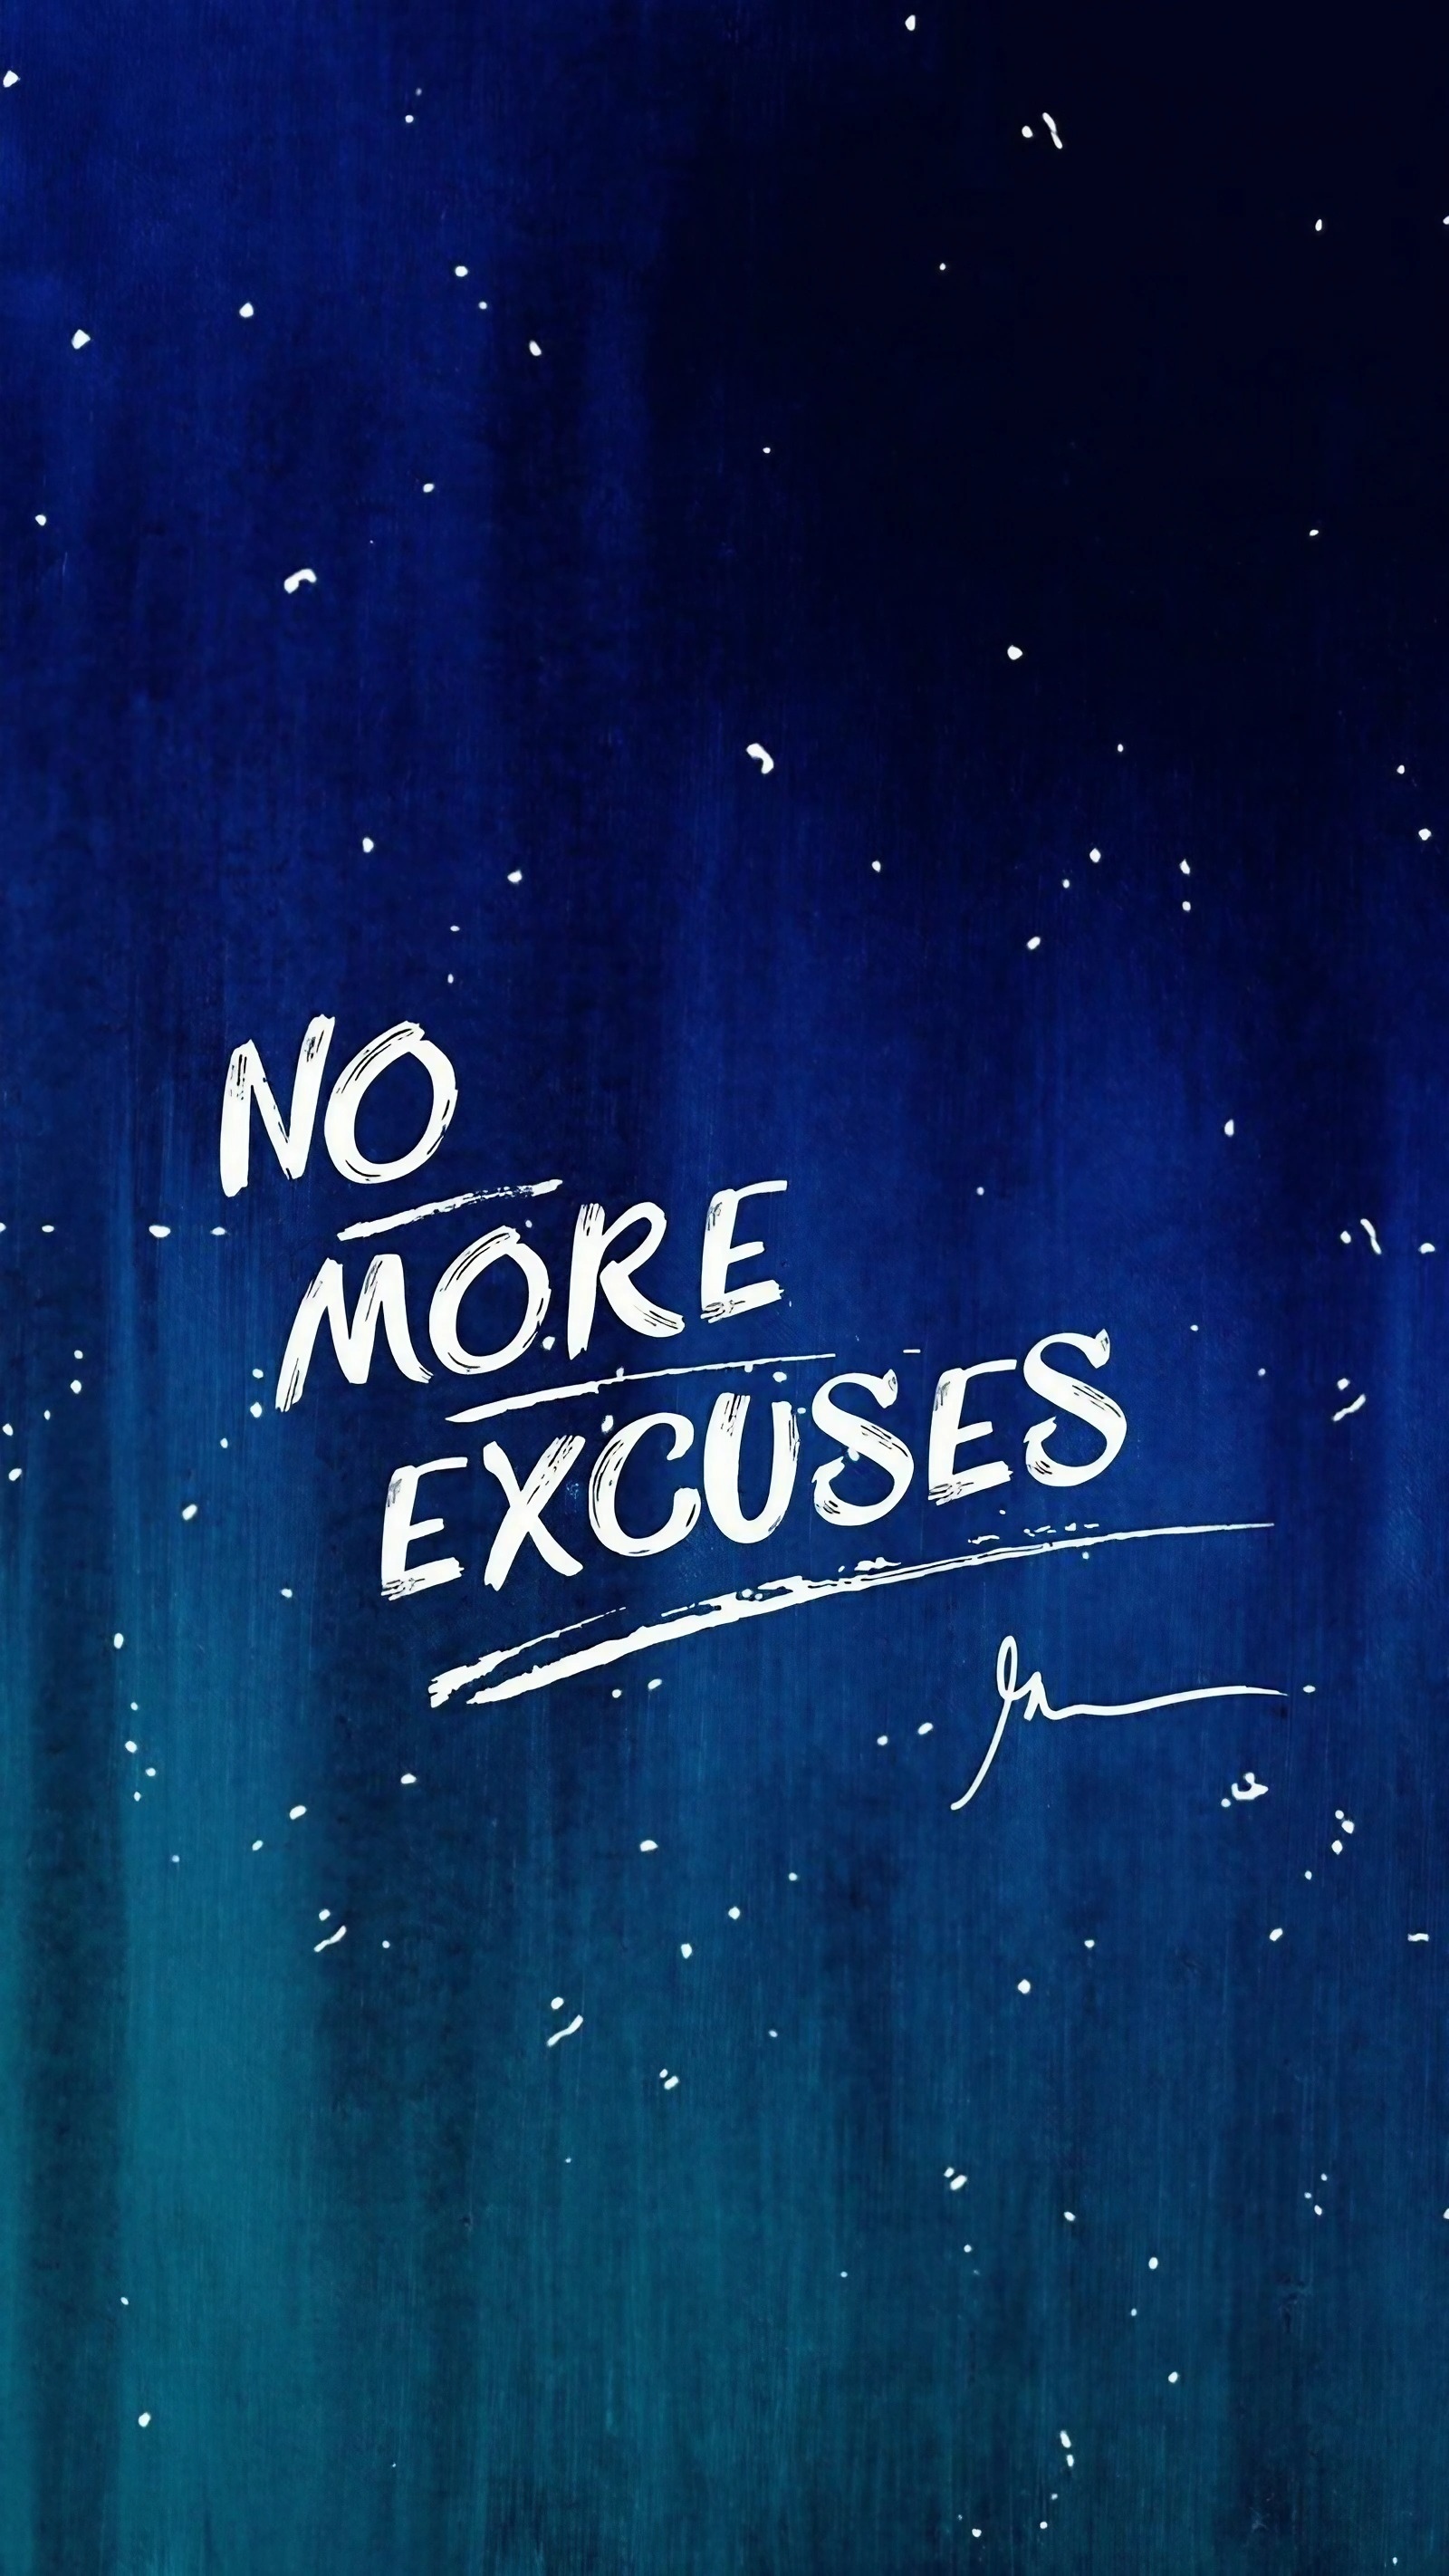 Study Motivation - No More Excuses